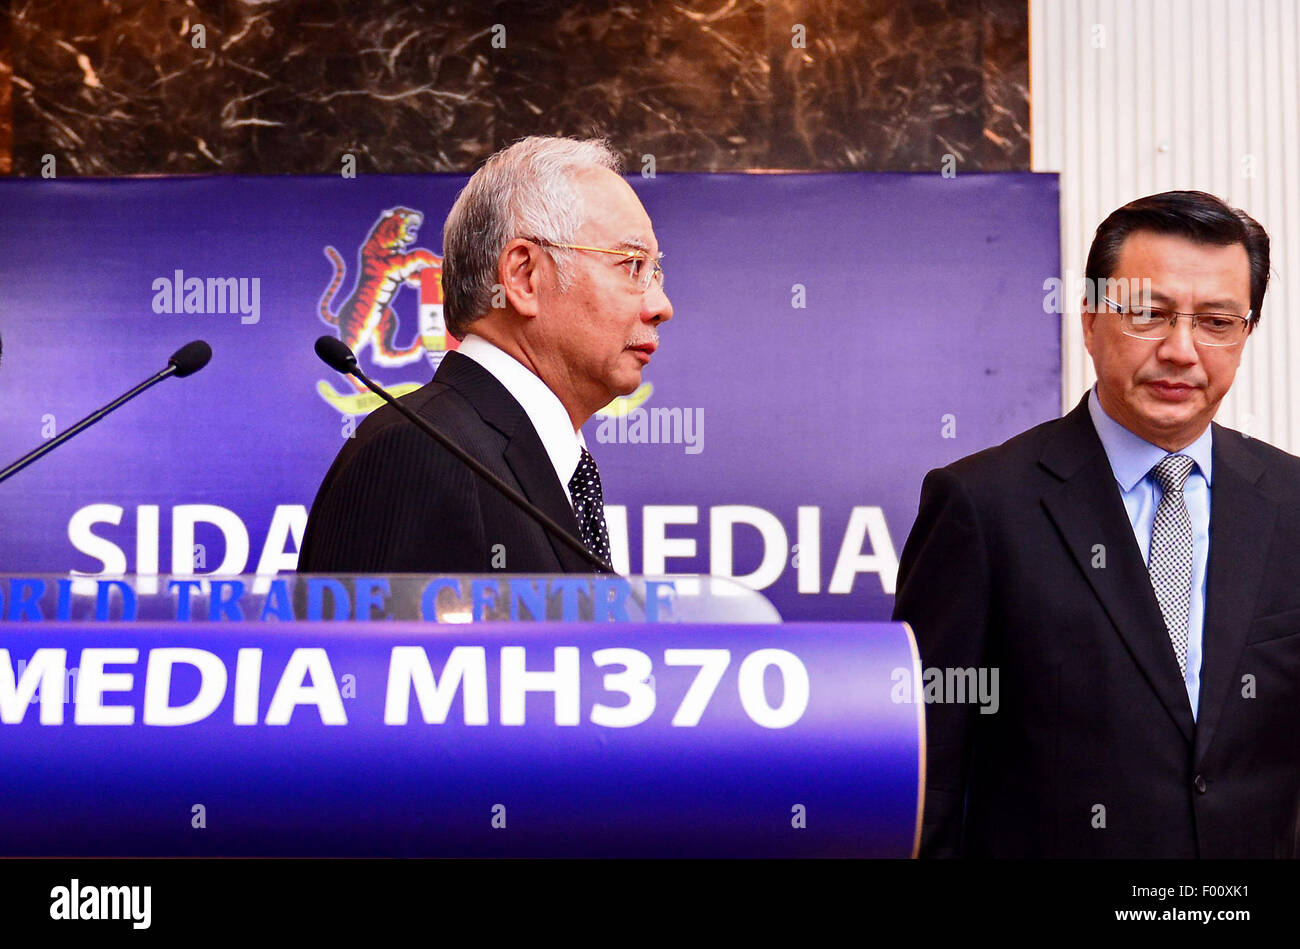 Kuala Lumpur, Malaysia. 6th Aug, 2015. Malaysian Prime Minister Najib Razak (L) attends a press conference on the missing Malaysian Airlines flight MH370 in Kuala Lumpur, Malaysia, Aug. 6, 2015. Verification had confirmed that the debris discovered on the Reunion Island belongs to the missing Malaysian Airlines flight MH370, Malaysian Prime Minister Najib Razak announced here early on Thursday. Credit:  Chong Voon Chung/Xinhua/Alamy Live News Stock Photo